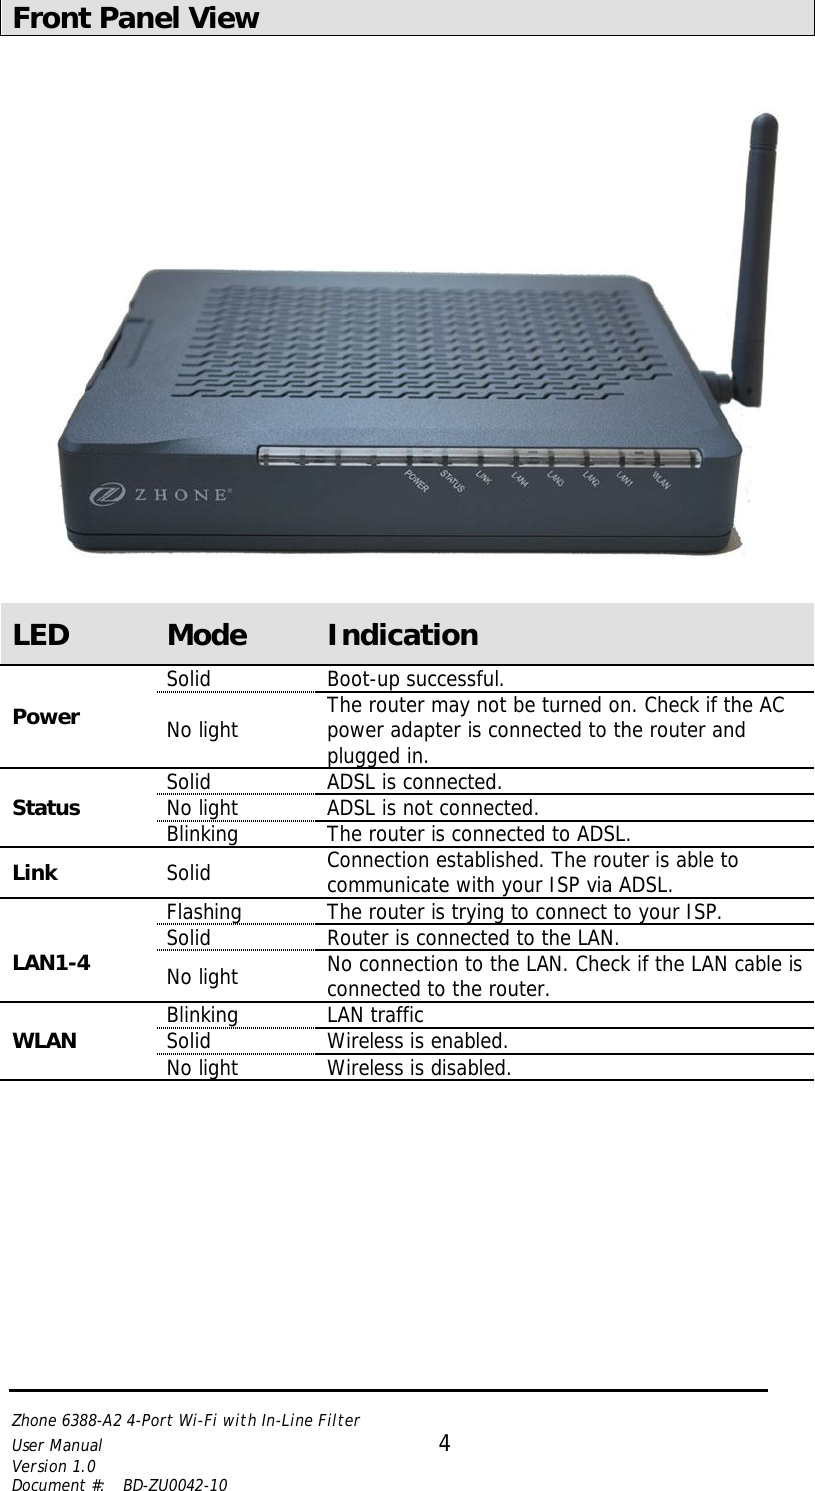   Zhone 6388-A2 4-Port Wi-Fi with In-Line Filter User Manual 4 Version 1.0 Document #:  BD-ZU0042-10    Front Panel View   LED  Mode  Indication Power Solid Boot-up successful. No light The router may not be turned on. Check if the AC power adapter is connected to the router and plugged in. Status Solid ADSL is connected. No light ADSL is not connected. Blinking The router is connected to ADSL. Link  Solid Connection established. The router is able to communicate with your ISP via ADSL.  LAN1-4 Flashing The router is trying to connect to your ISP. Solid Router is connected to the LAN. No light No connection to the LAN. Check if the LAN cable is connected to the router. WLAN Blinking LAN traffic Solid Wireless is enabled. No light Wireless is disabled. 